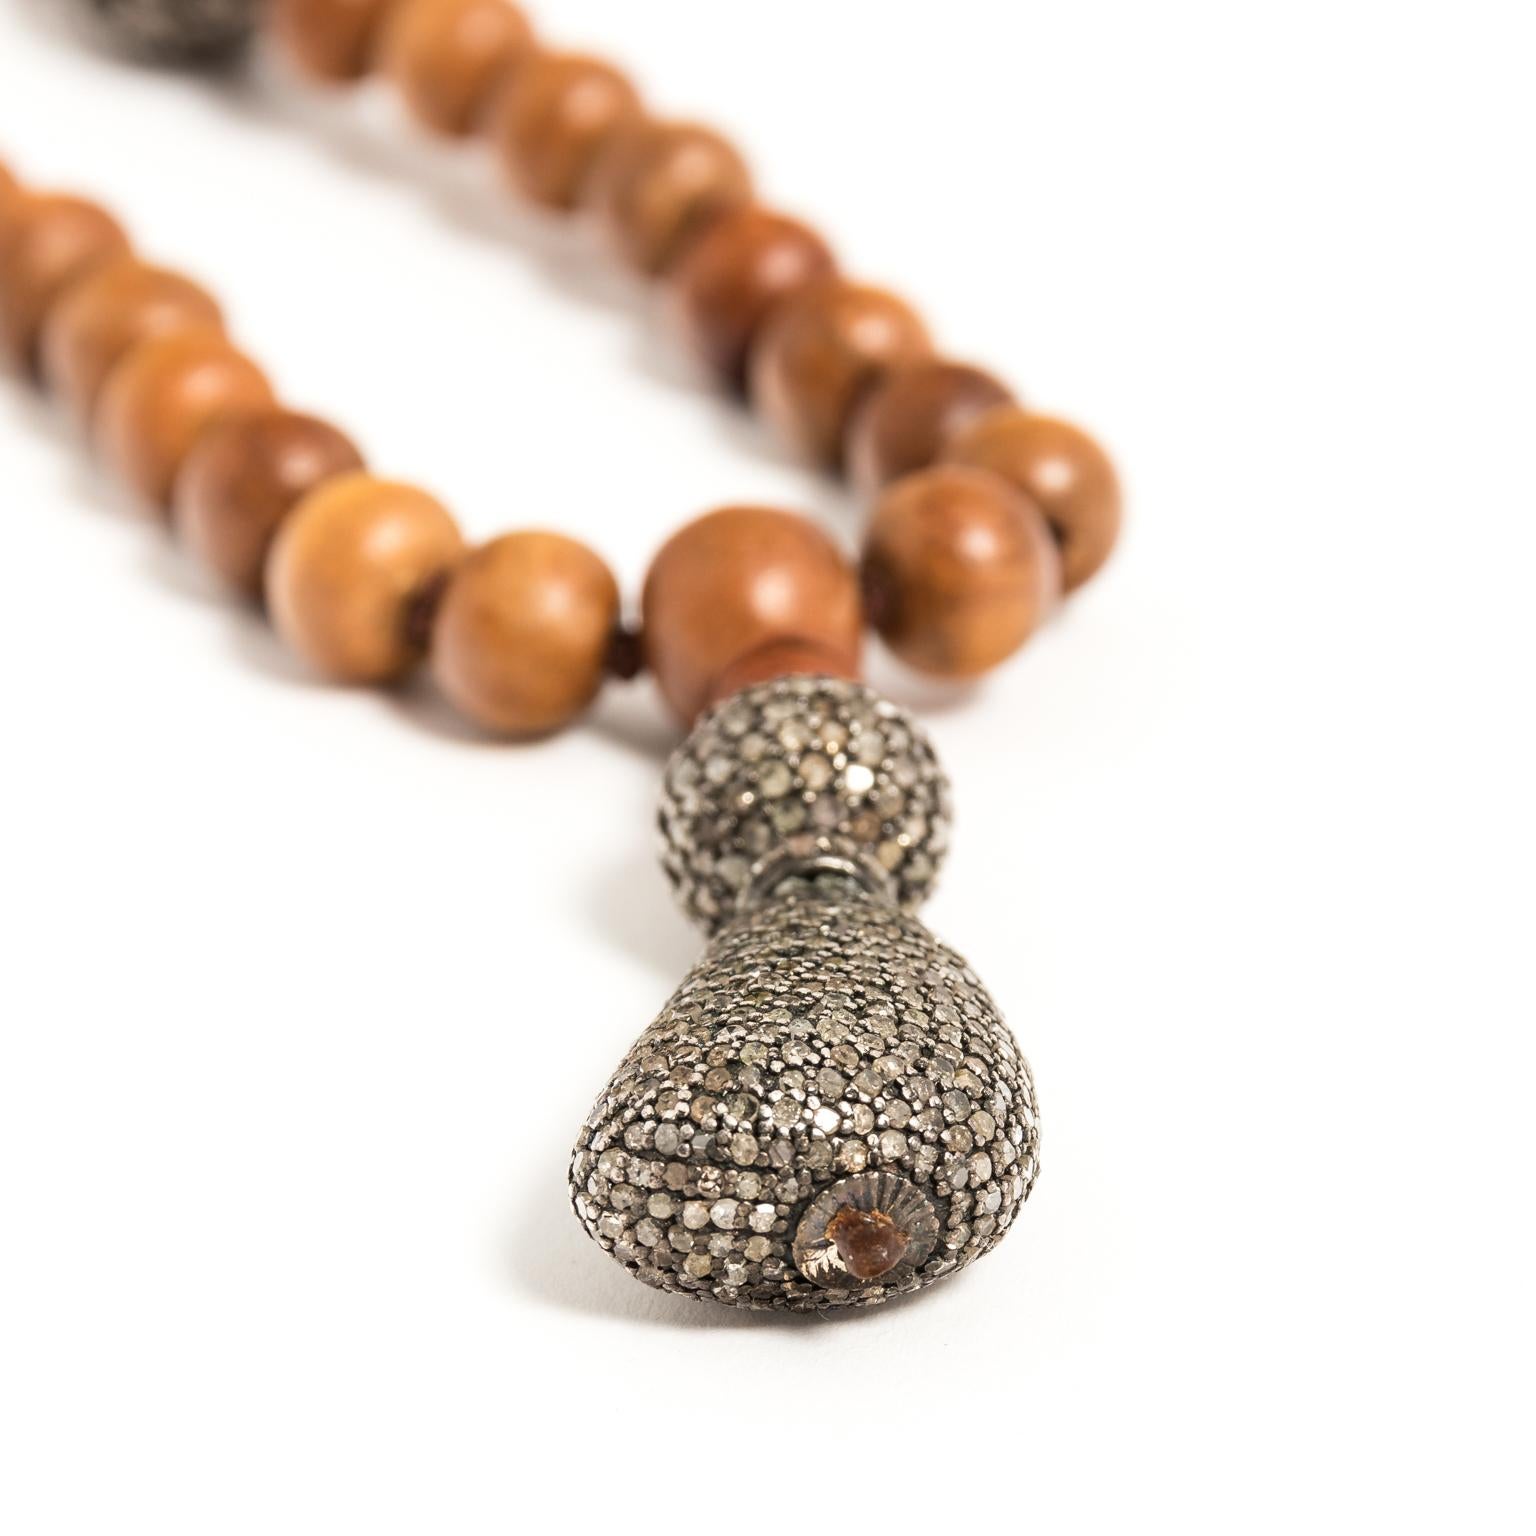 Circa 1990s sandalwood beaded necklace with two open work design elements in pave rose cut diamonds and a pendant covered in rose cut diamonds. All hand knotted with a chain that can be doubled or shortened in length.
